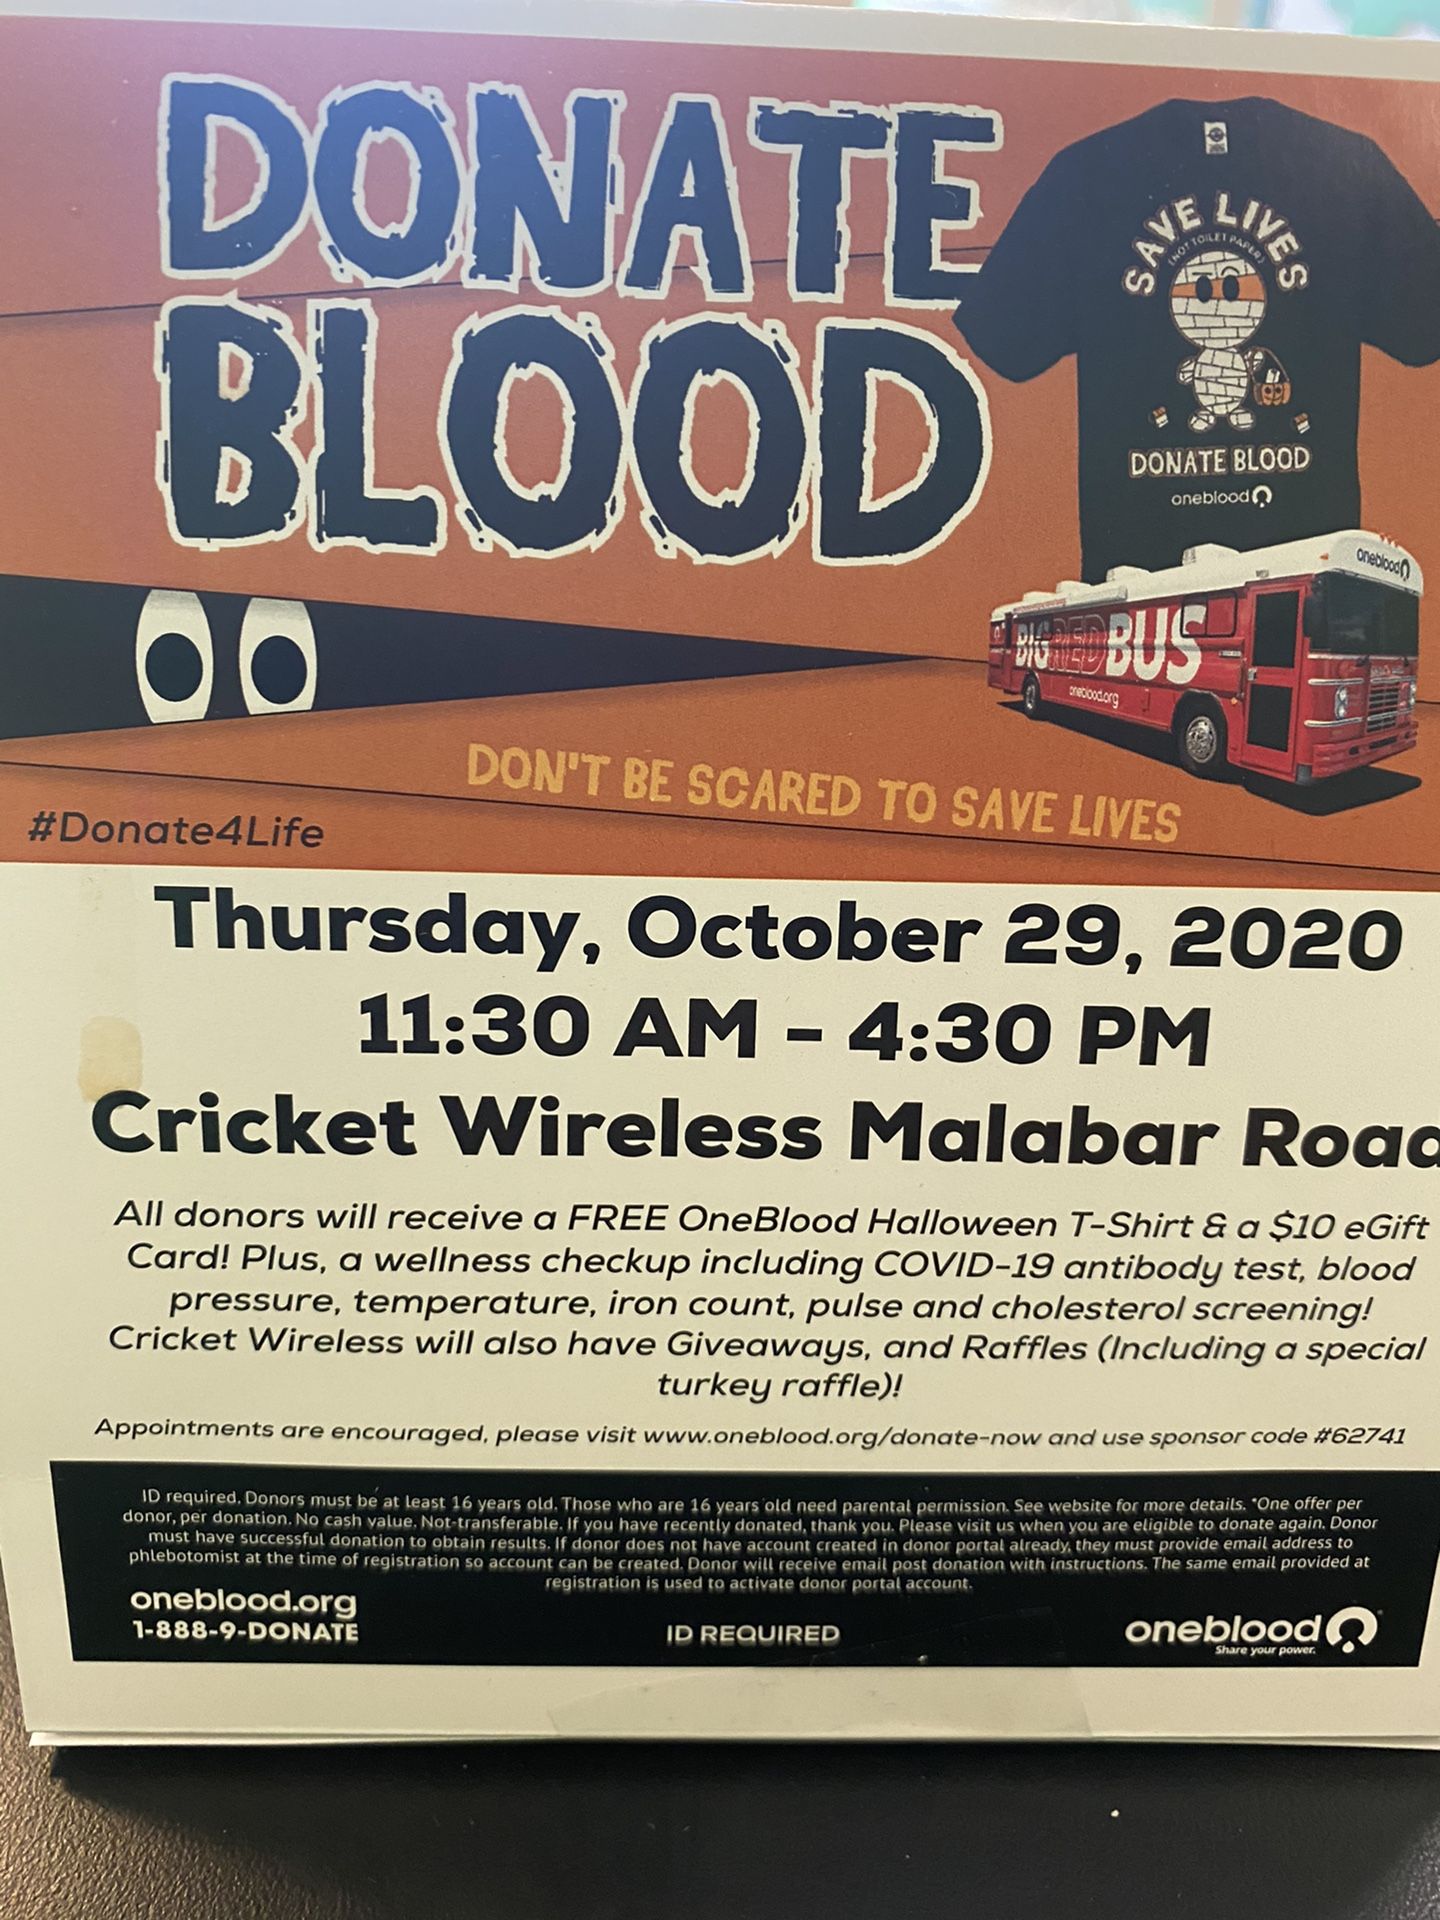 Donate Blood, Get a FREE Tshirt, $10 e-gift card, wellness check, Enter into a raffle to get a FREE phone at Cricket wireless on 190 Malabar rd TODAY!